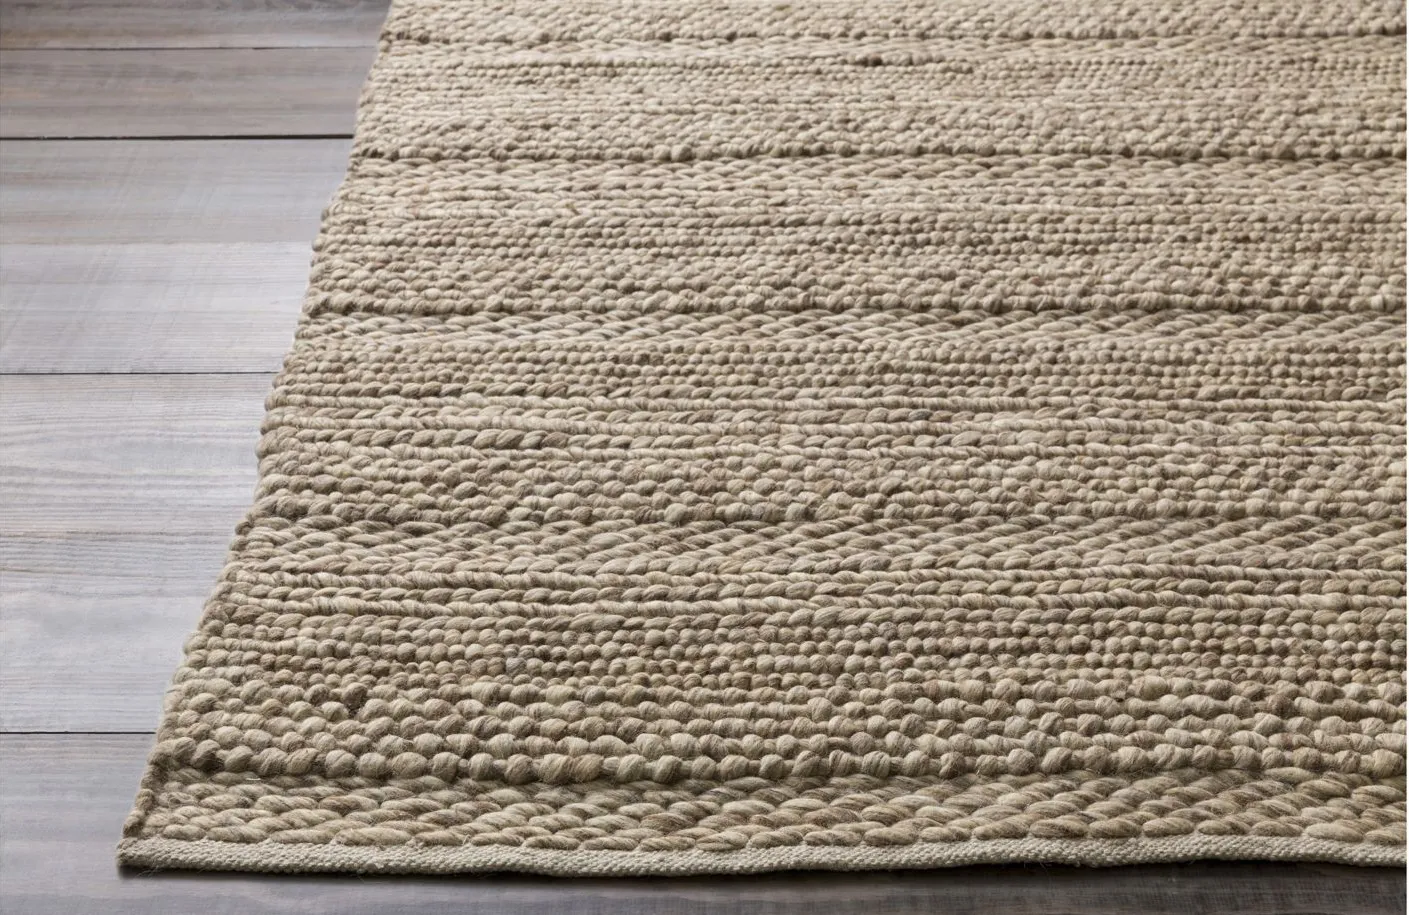 Tahoe Area Rug in Cream, Camel, Charcoal by Surya